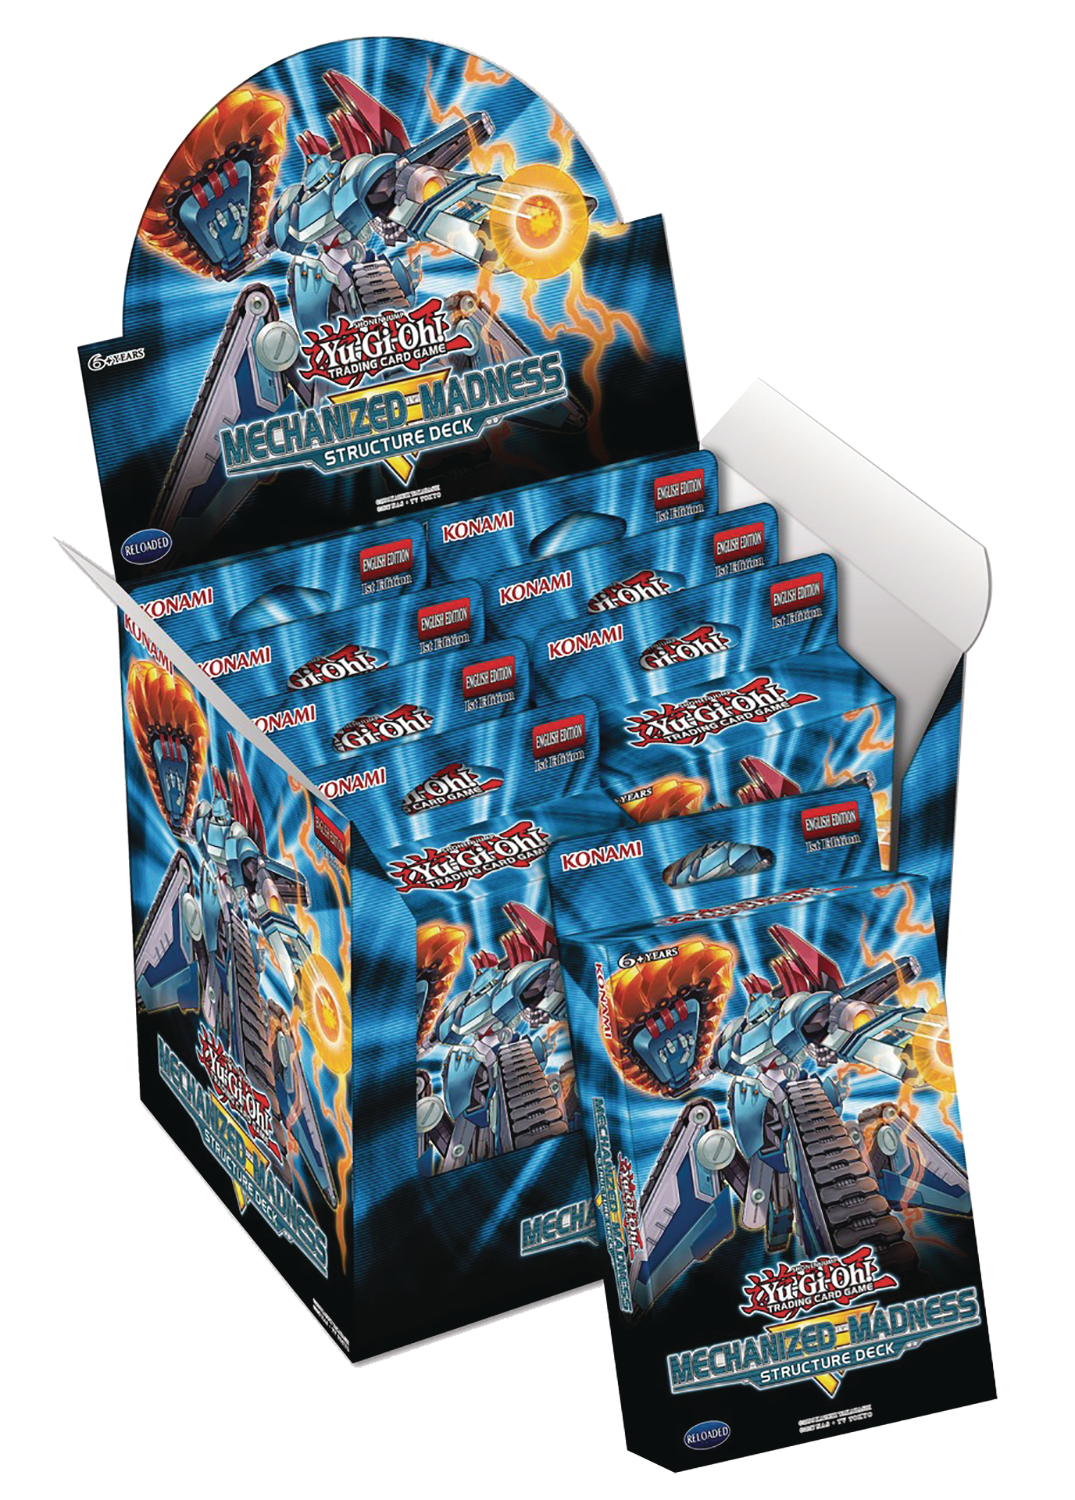 Yu-Gi-Oh! TCG Mechanized Madness Structure Deck Display (8Ct)